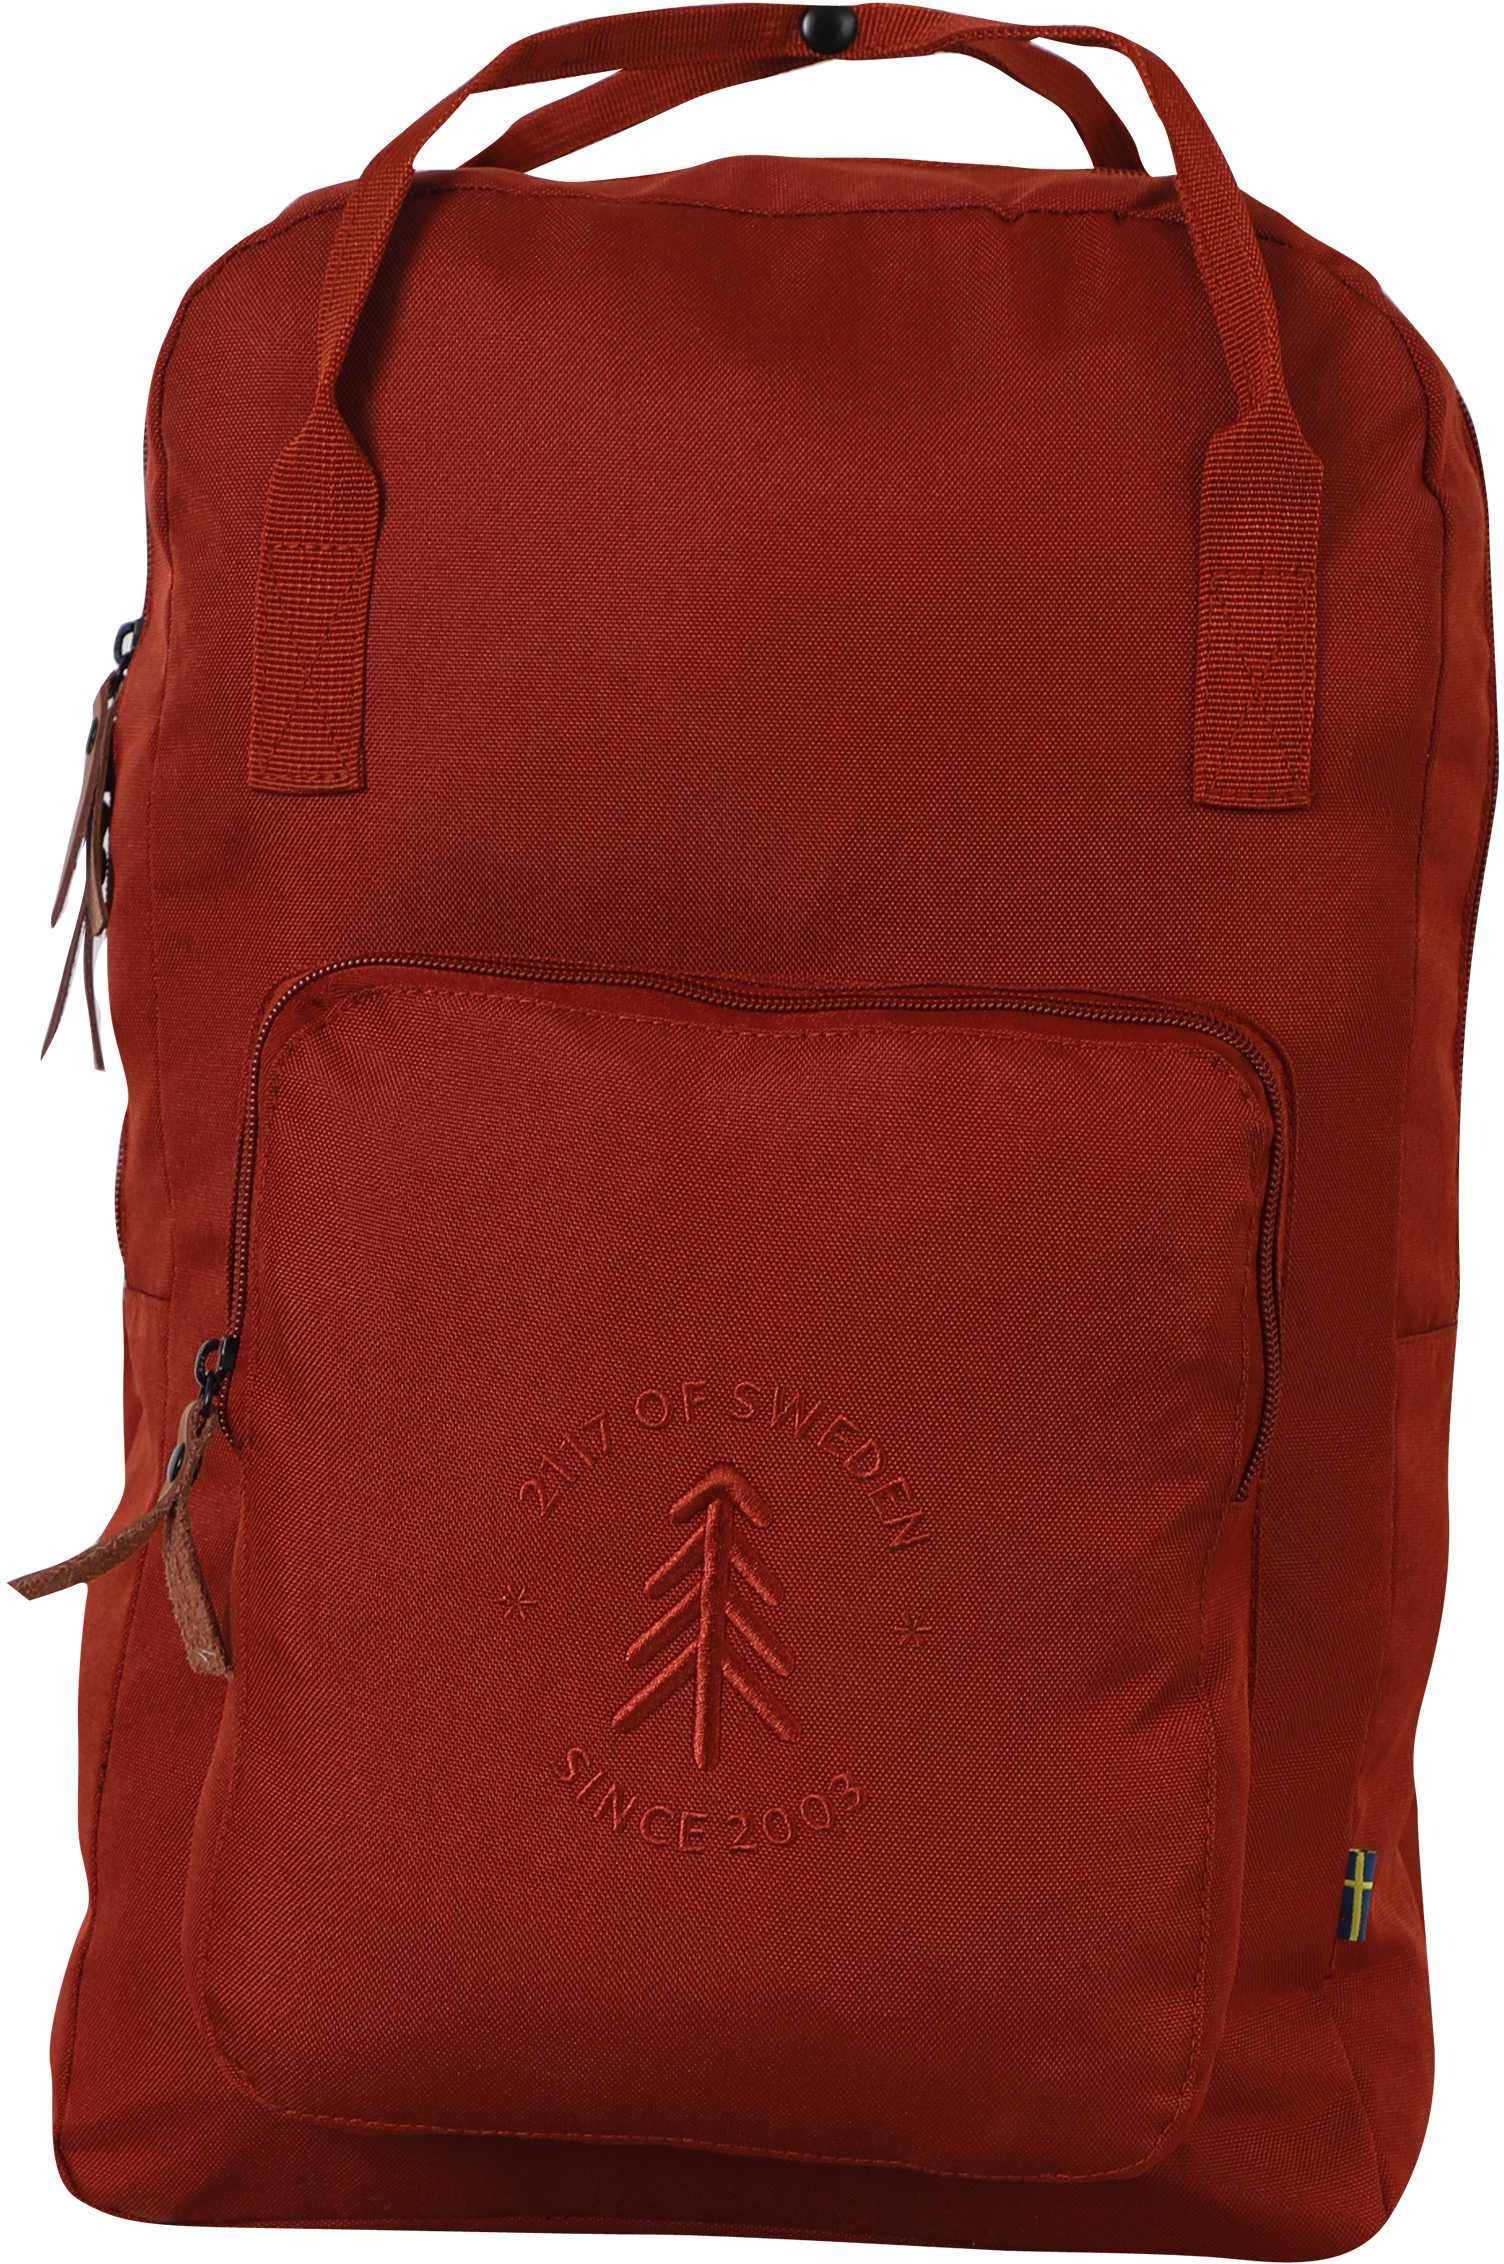 Large city backpack